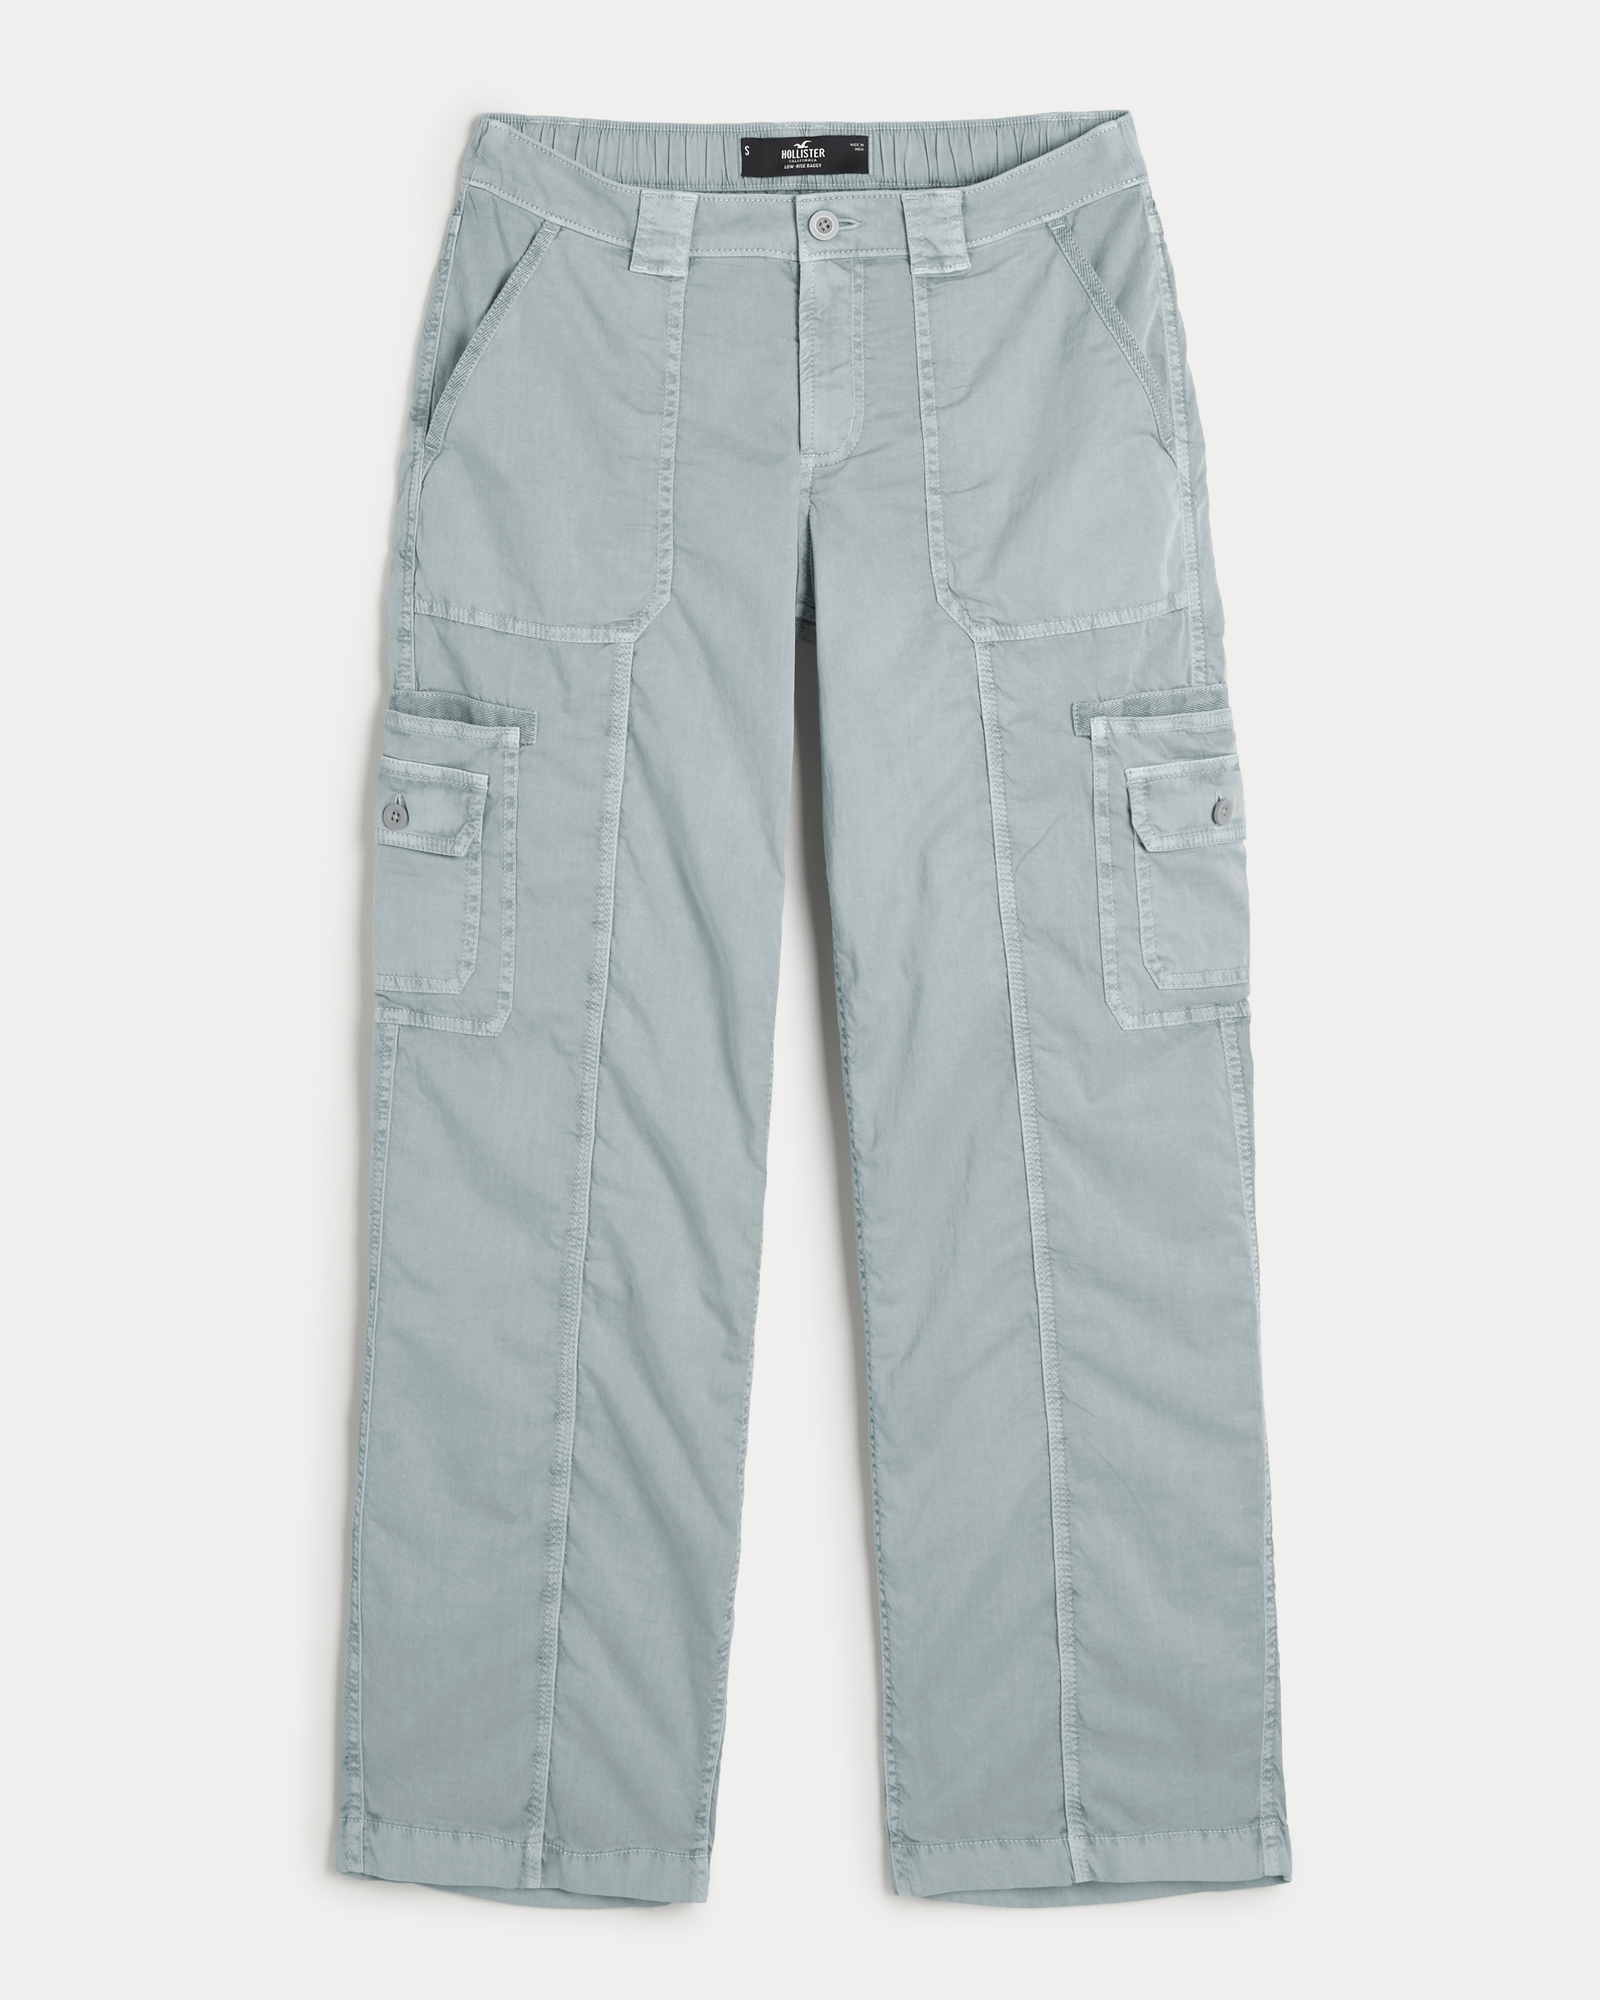 Hollister Baggy Cargo Pant In Cream-White for Women